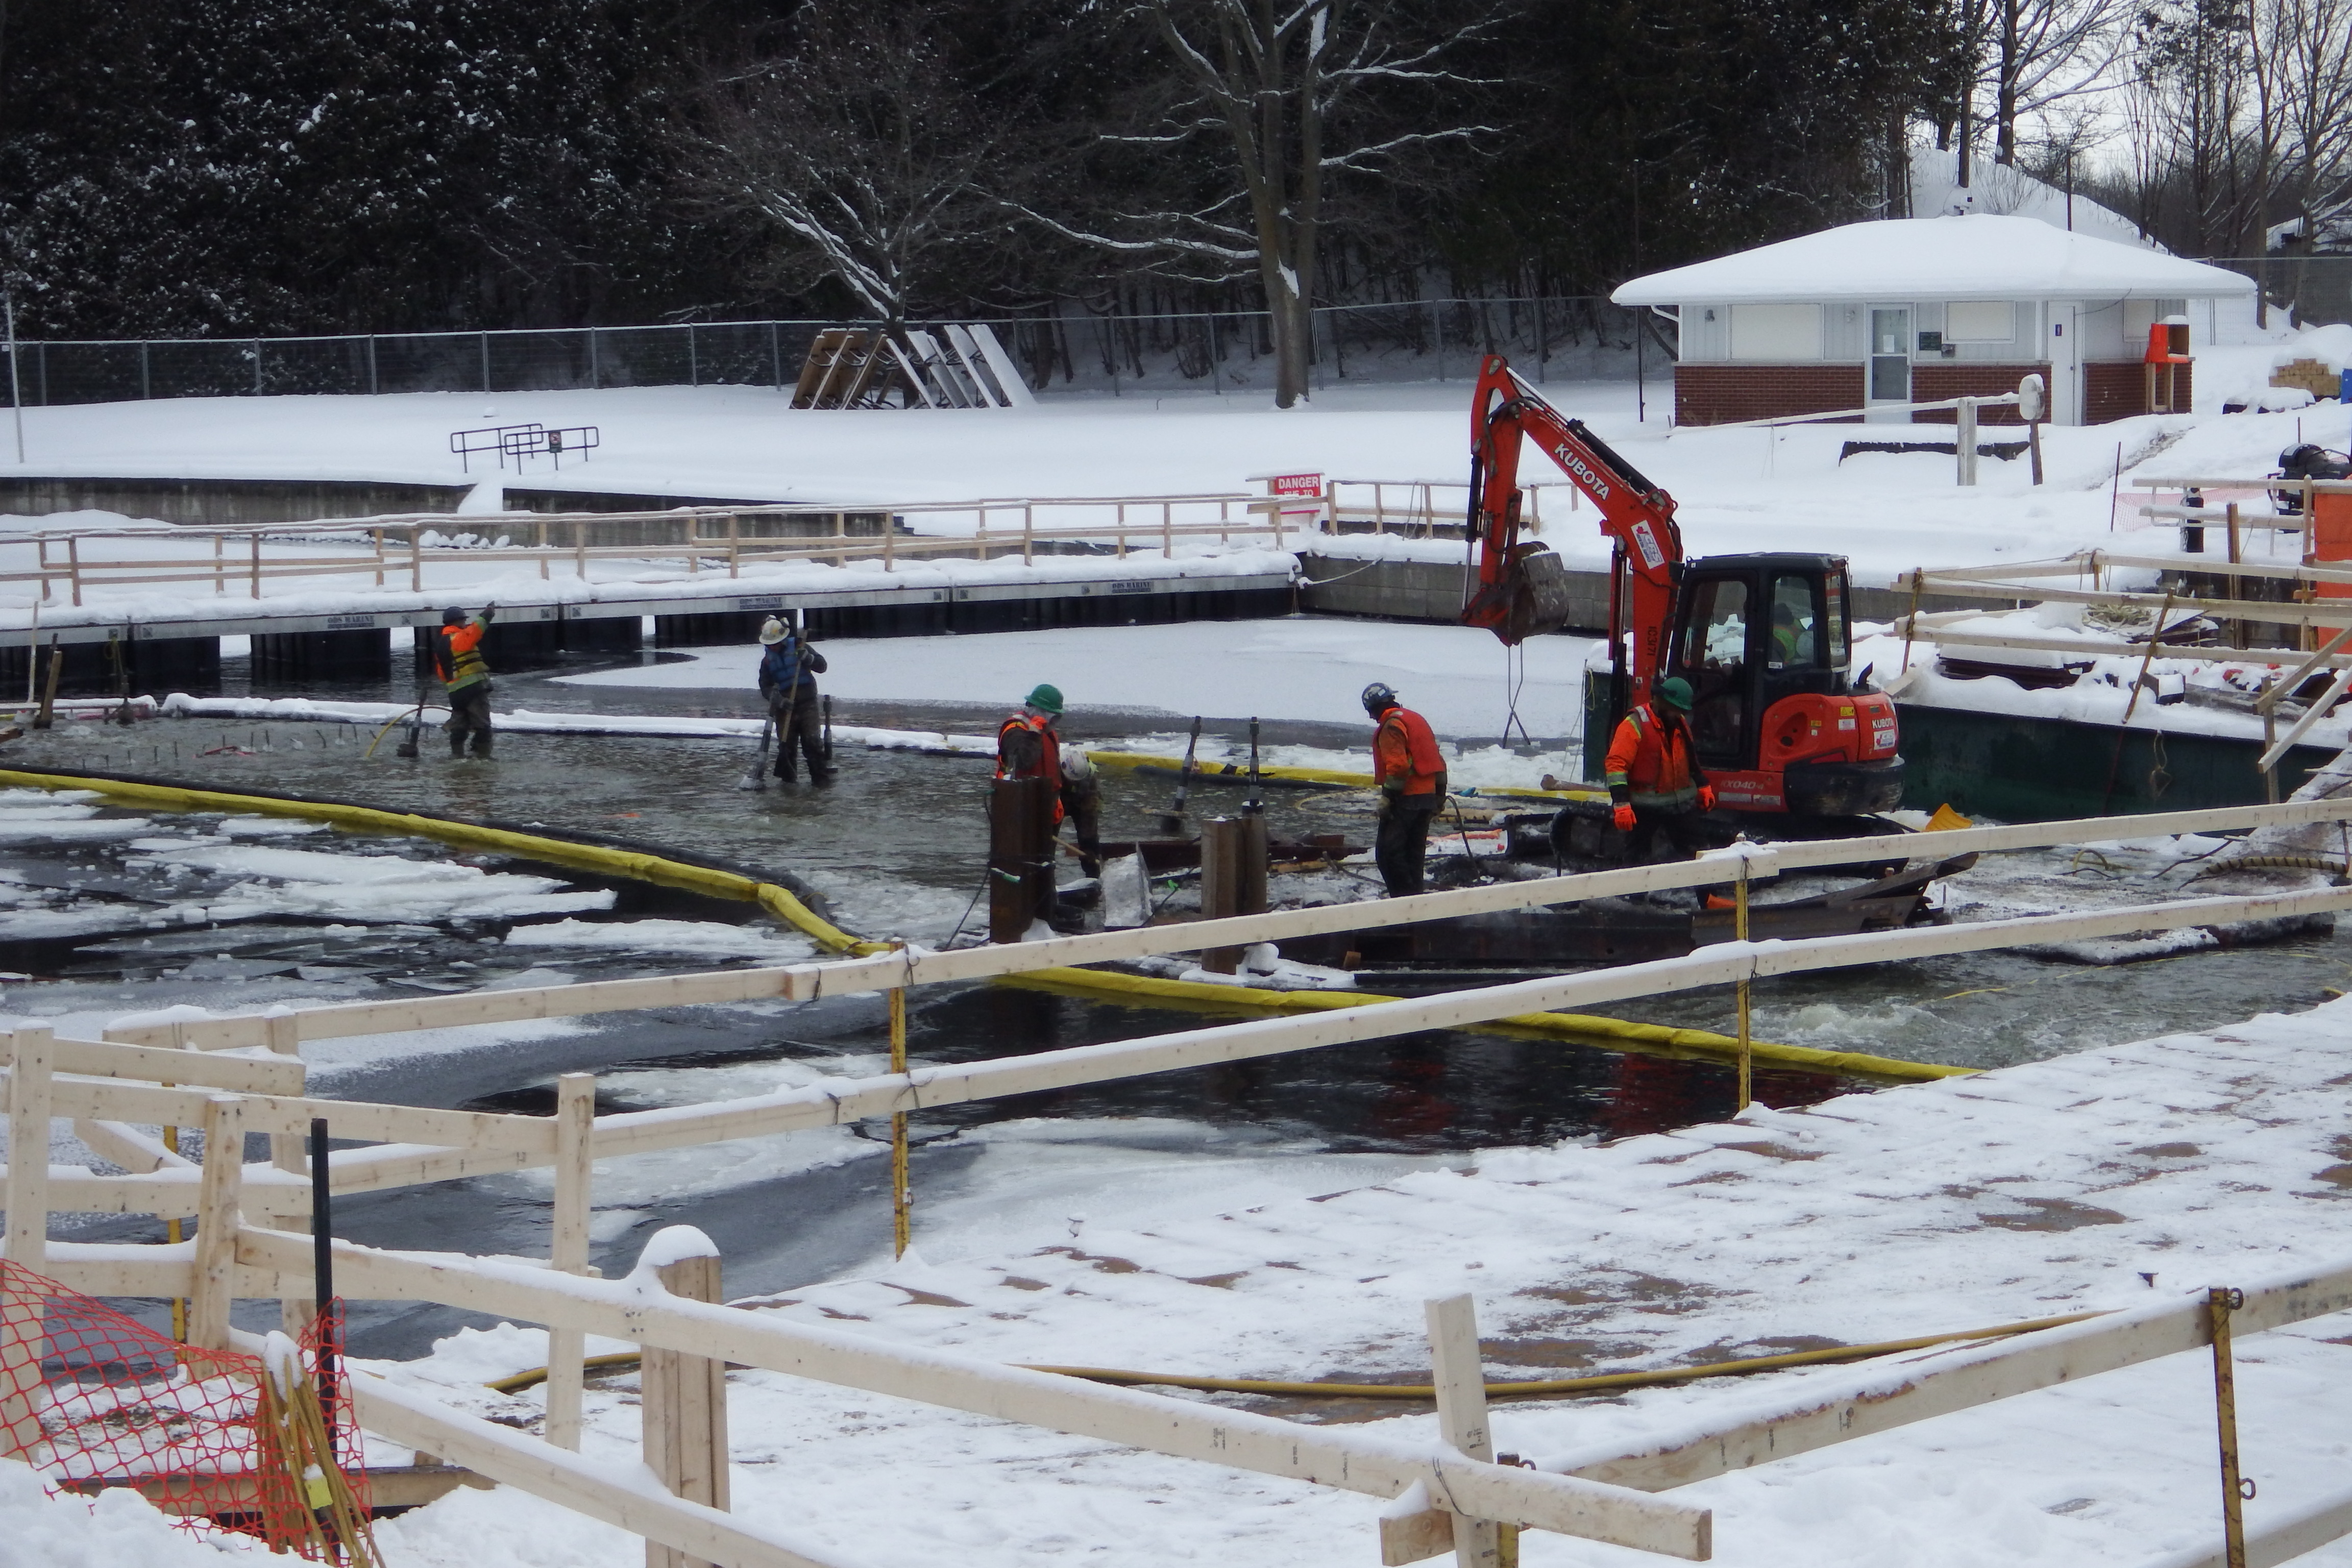 A snowy construction site. Workers in the water with a mini excavator nearby.